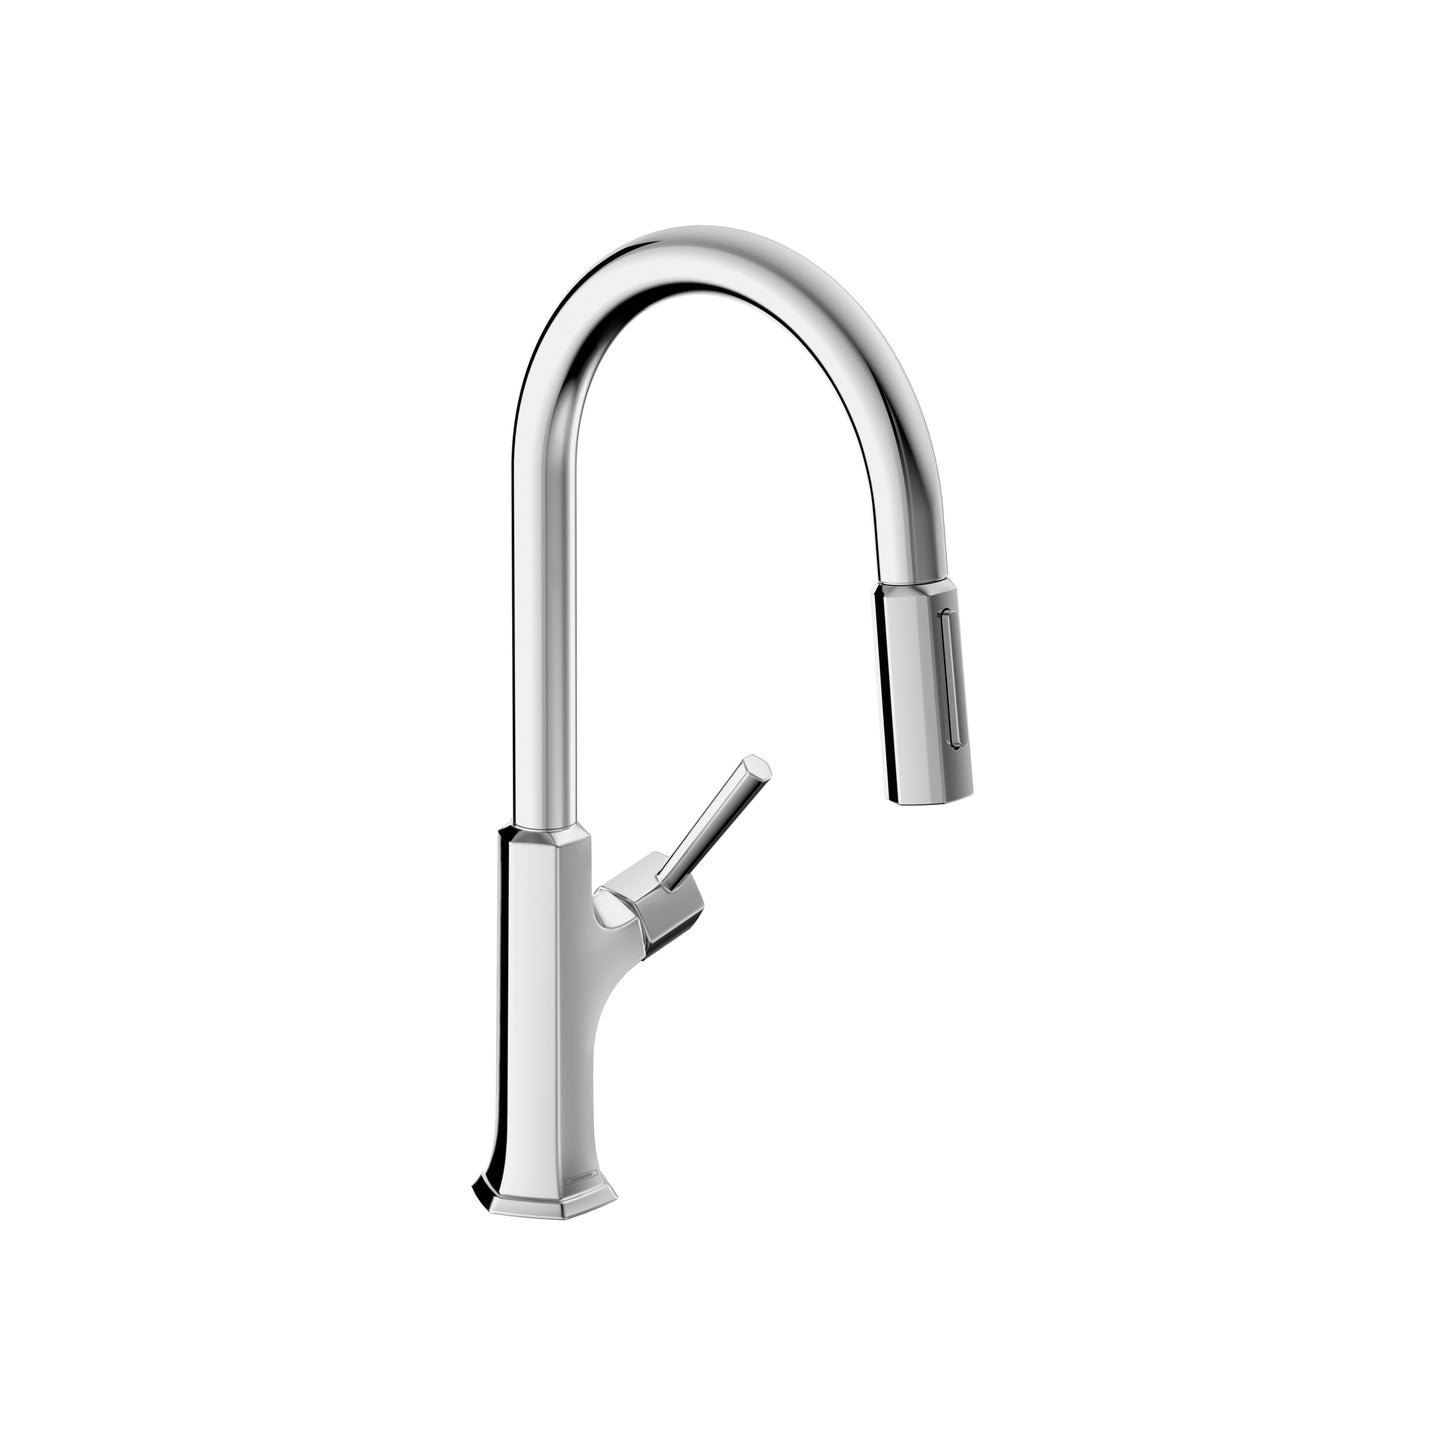 HANSGROHE 04827000 Chrome Locarno Transitional Kitchen Faucet 1.75 GPM